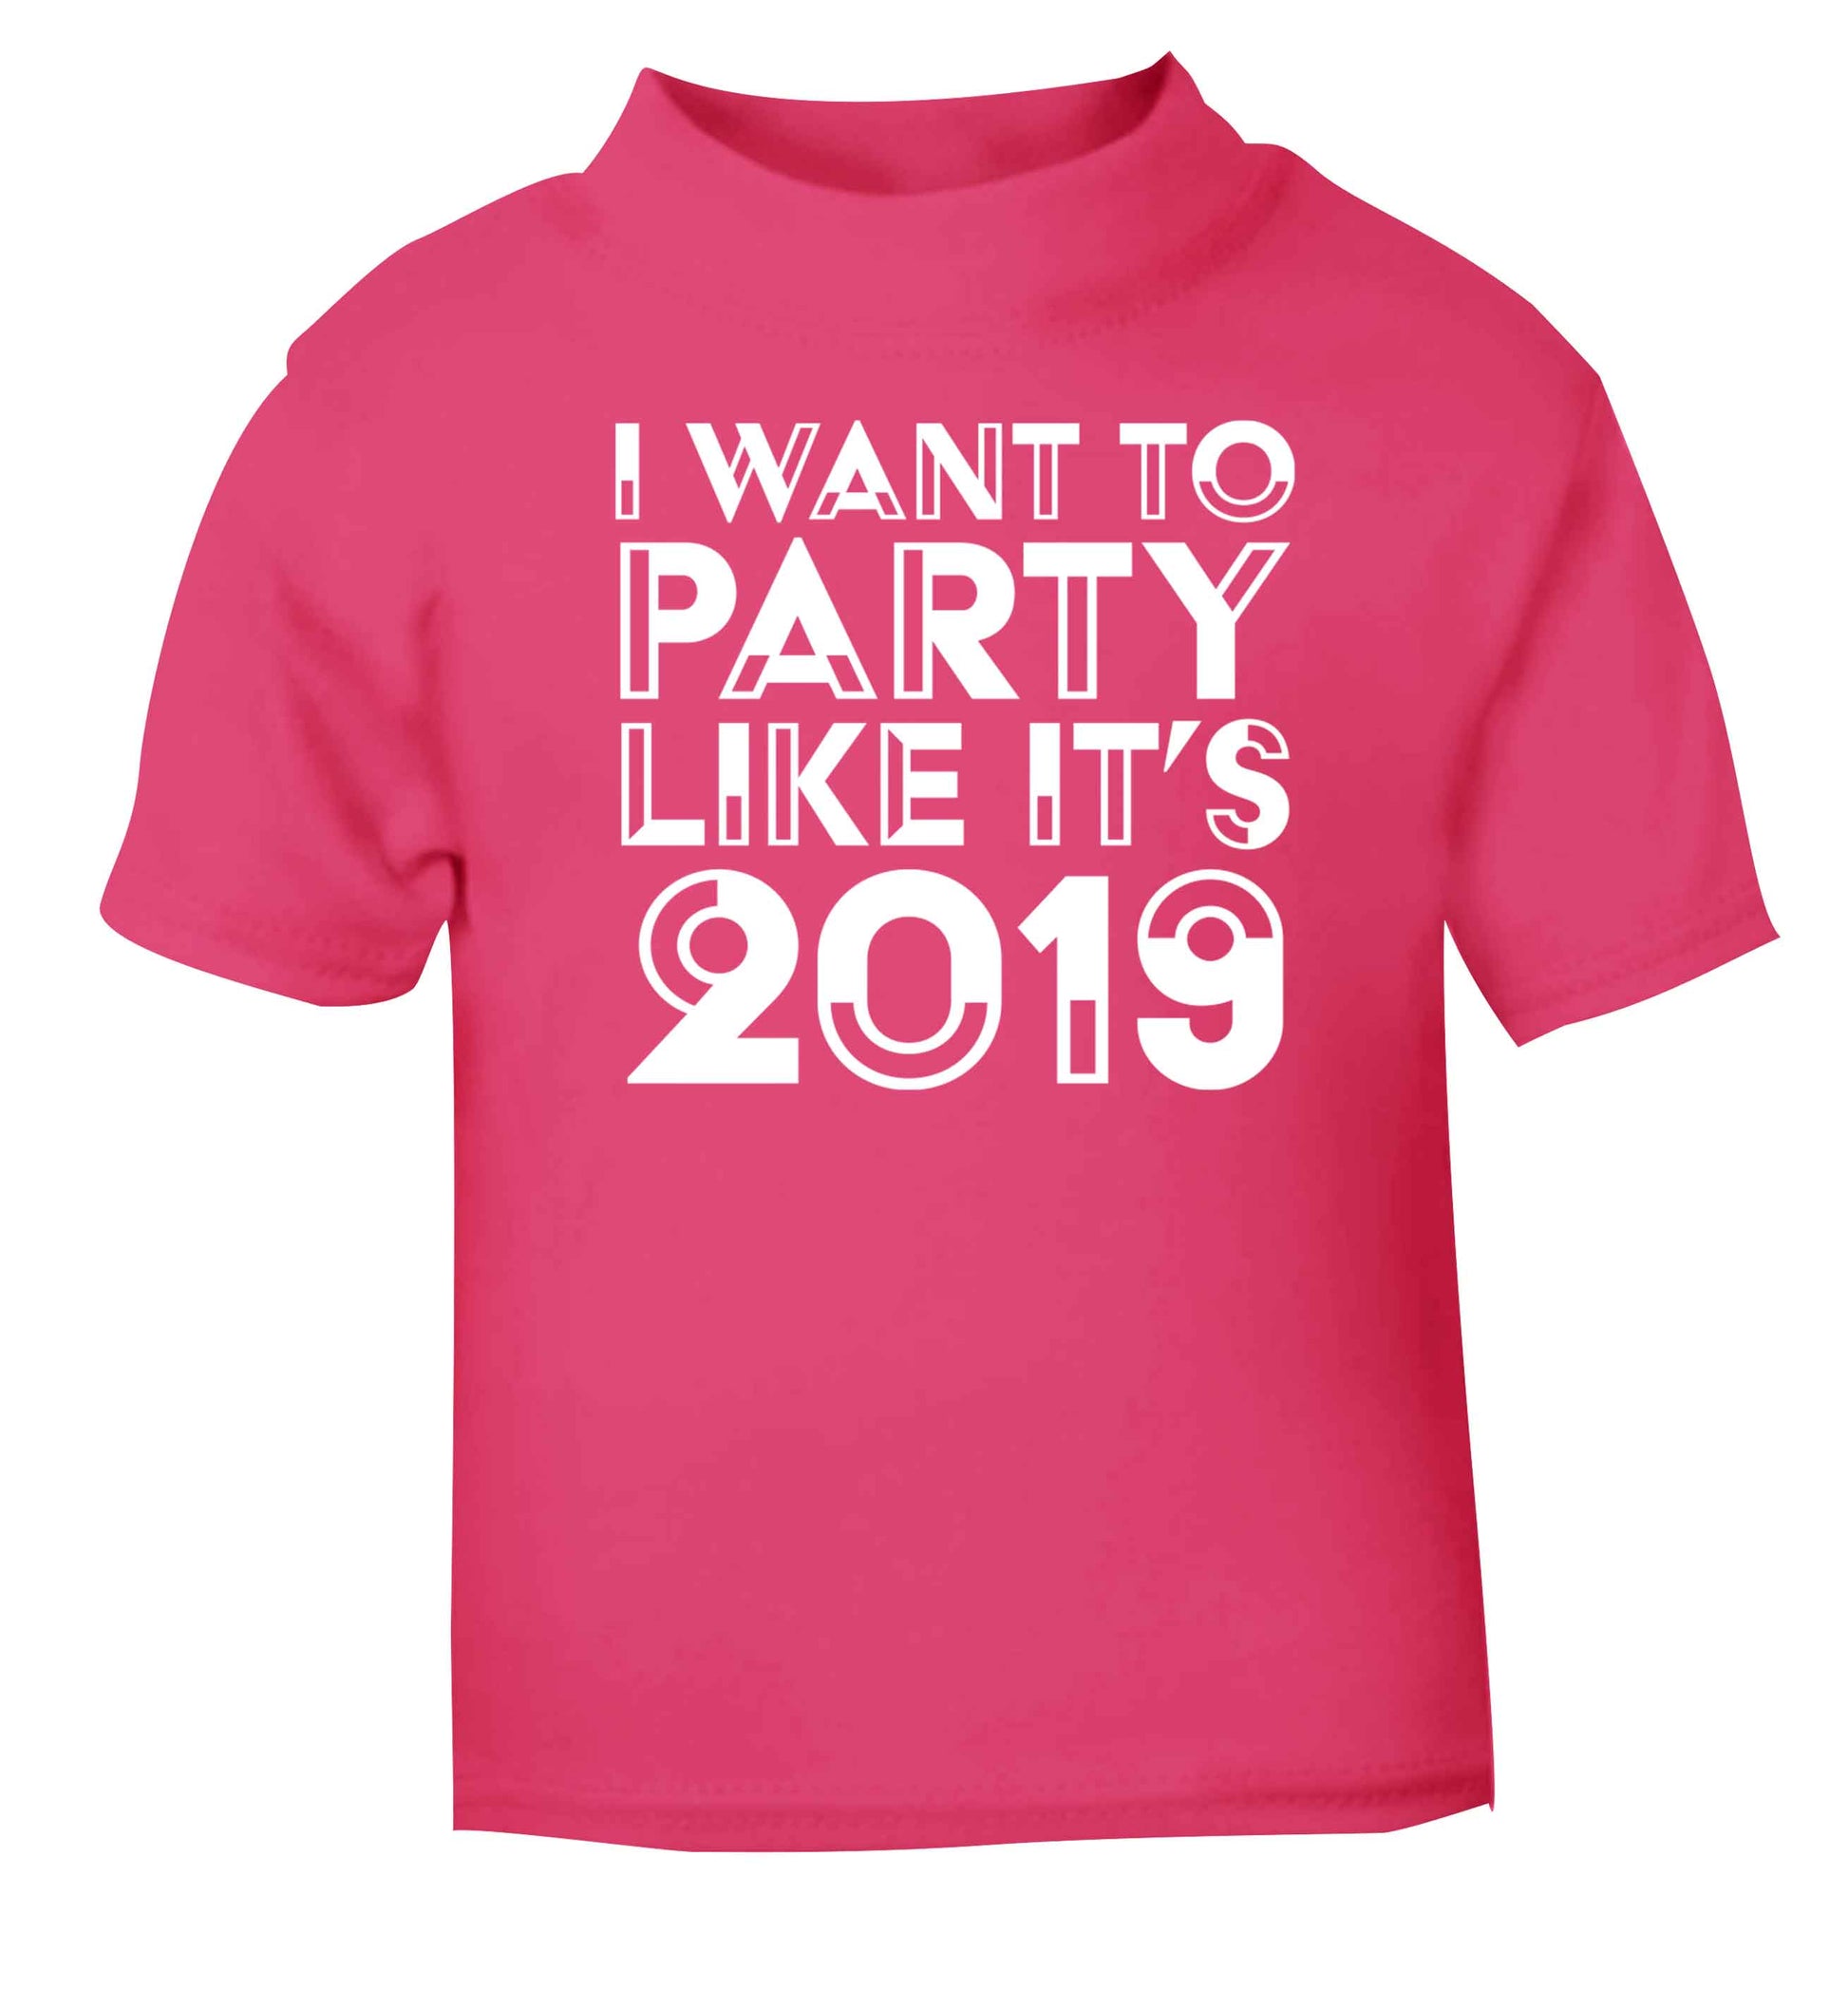 I want to party like it's 2019 pink baby toddler Tshirt 2 Years